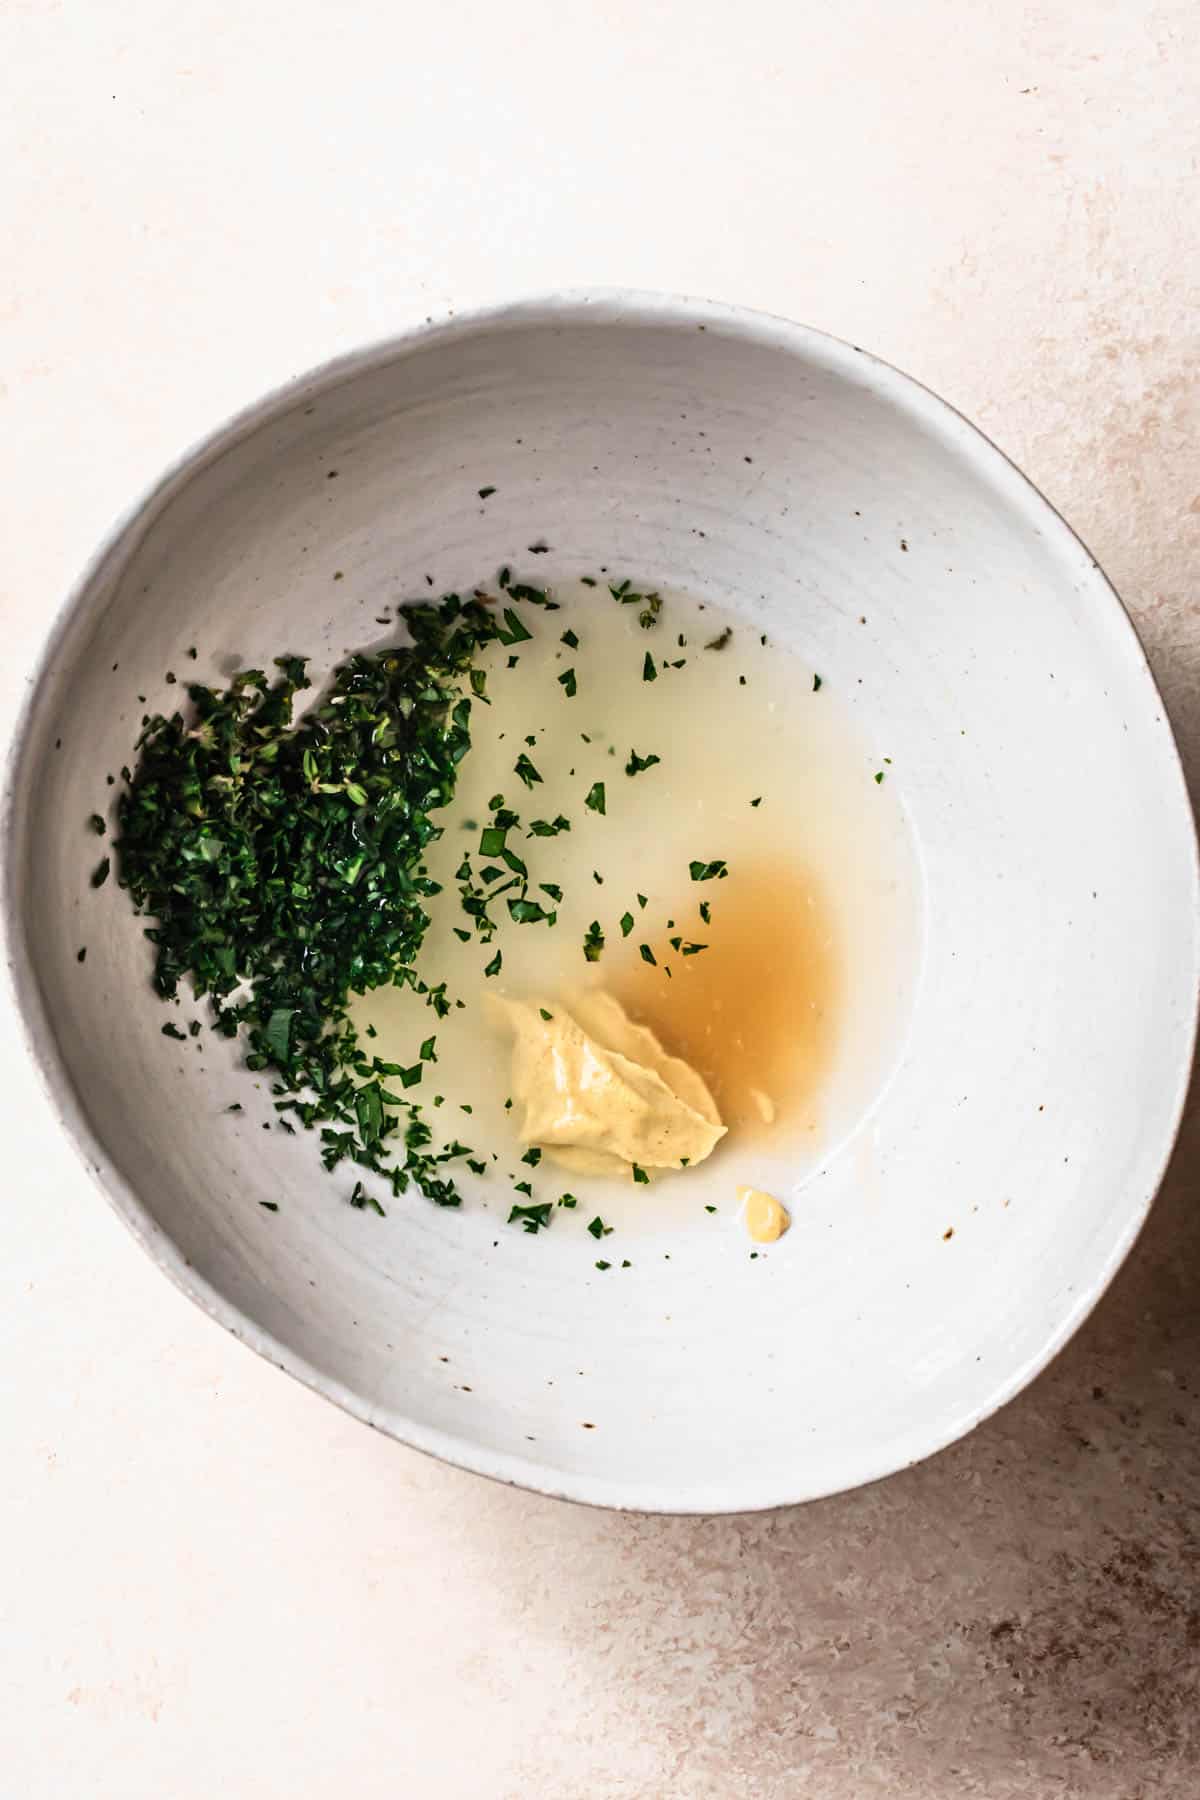 Top down image of ingredients for a lemon herb dressing in a white ceramic bowl.